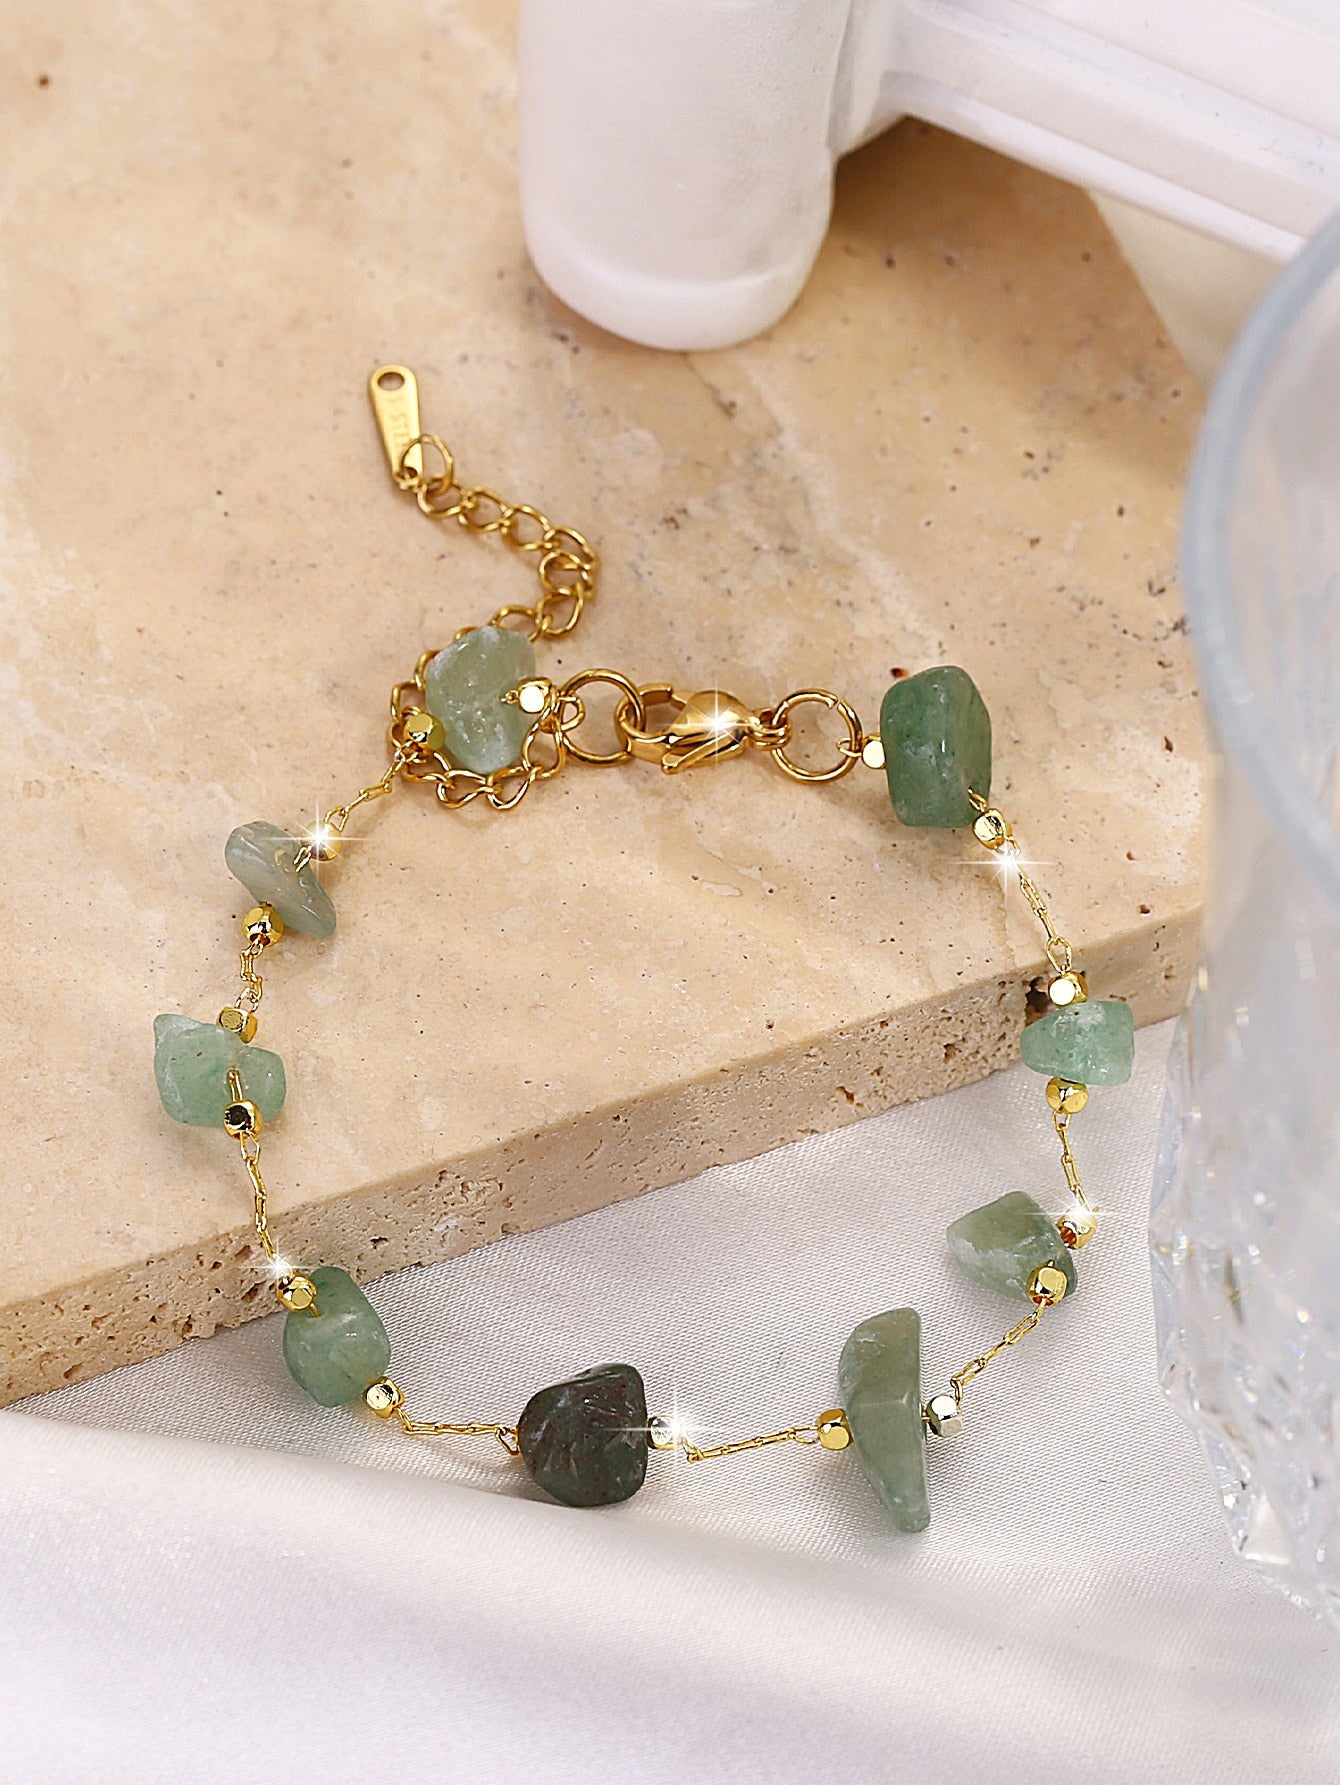 Bohemian Style Double-layer Stainless Steel Bracelet With Irregular Green Stones For(size Of Stones Vary)